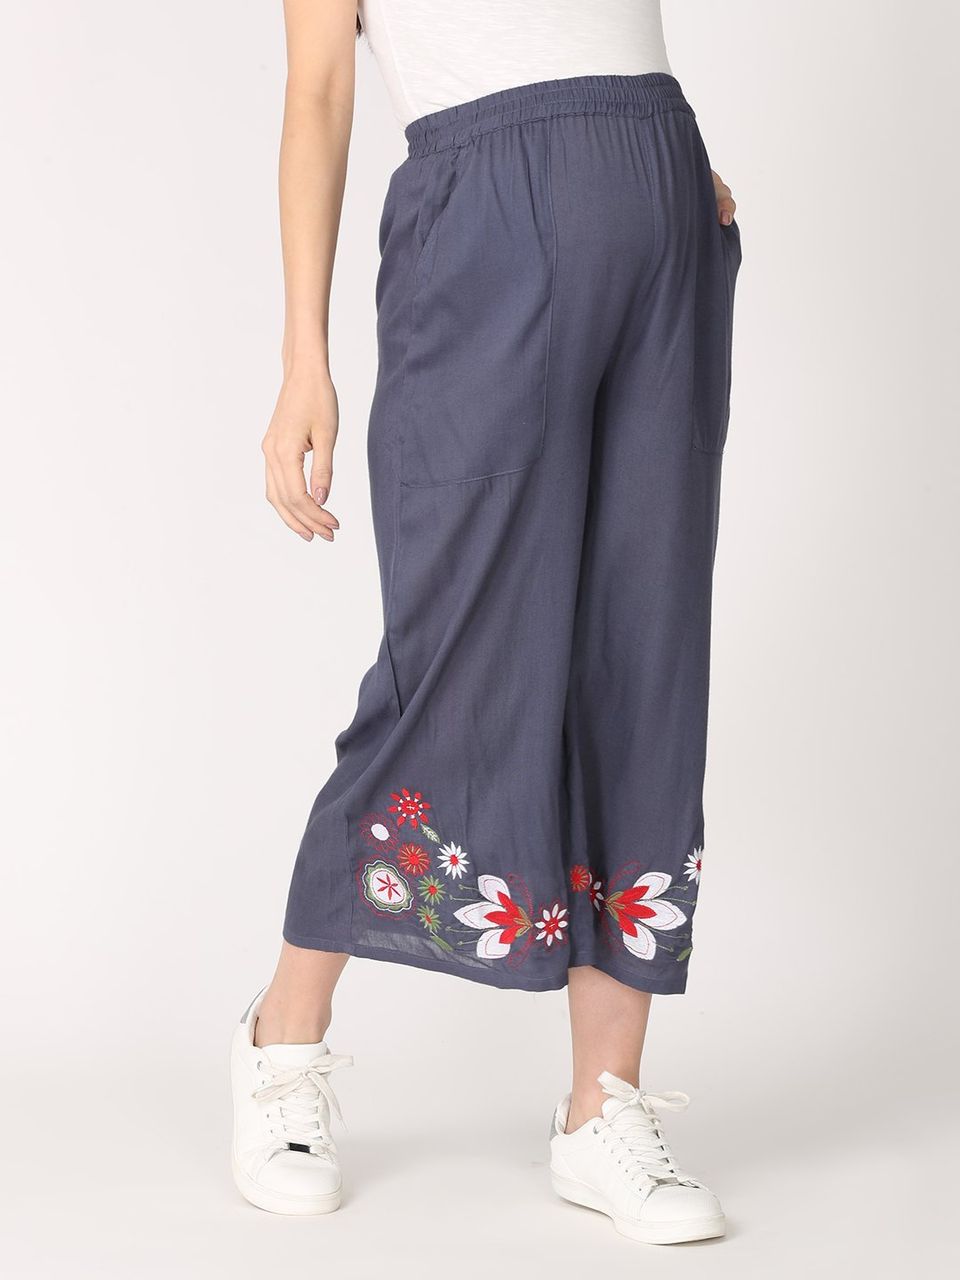 The Mom Store Grey Garden Embroided Maternity Culottes Pants